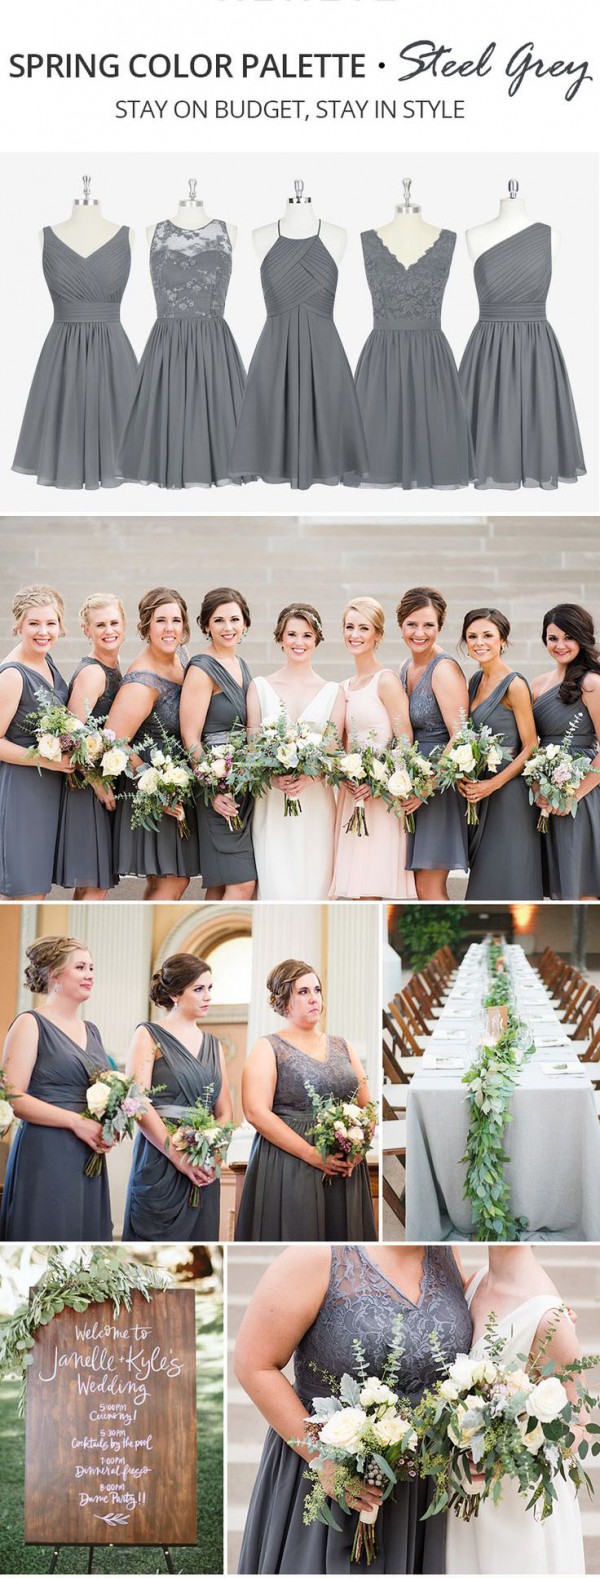 8 Trending Spring Color Palette For Your Bridesmaid Dresses 1244